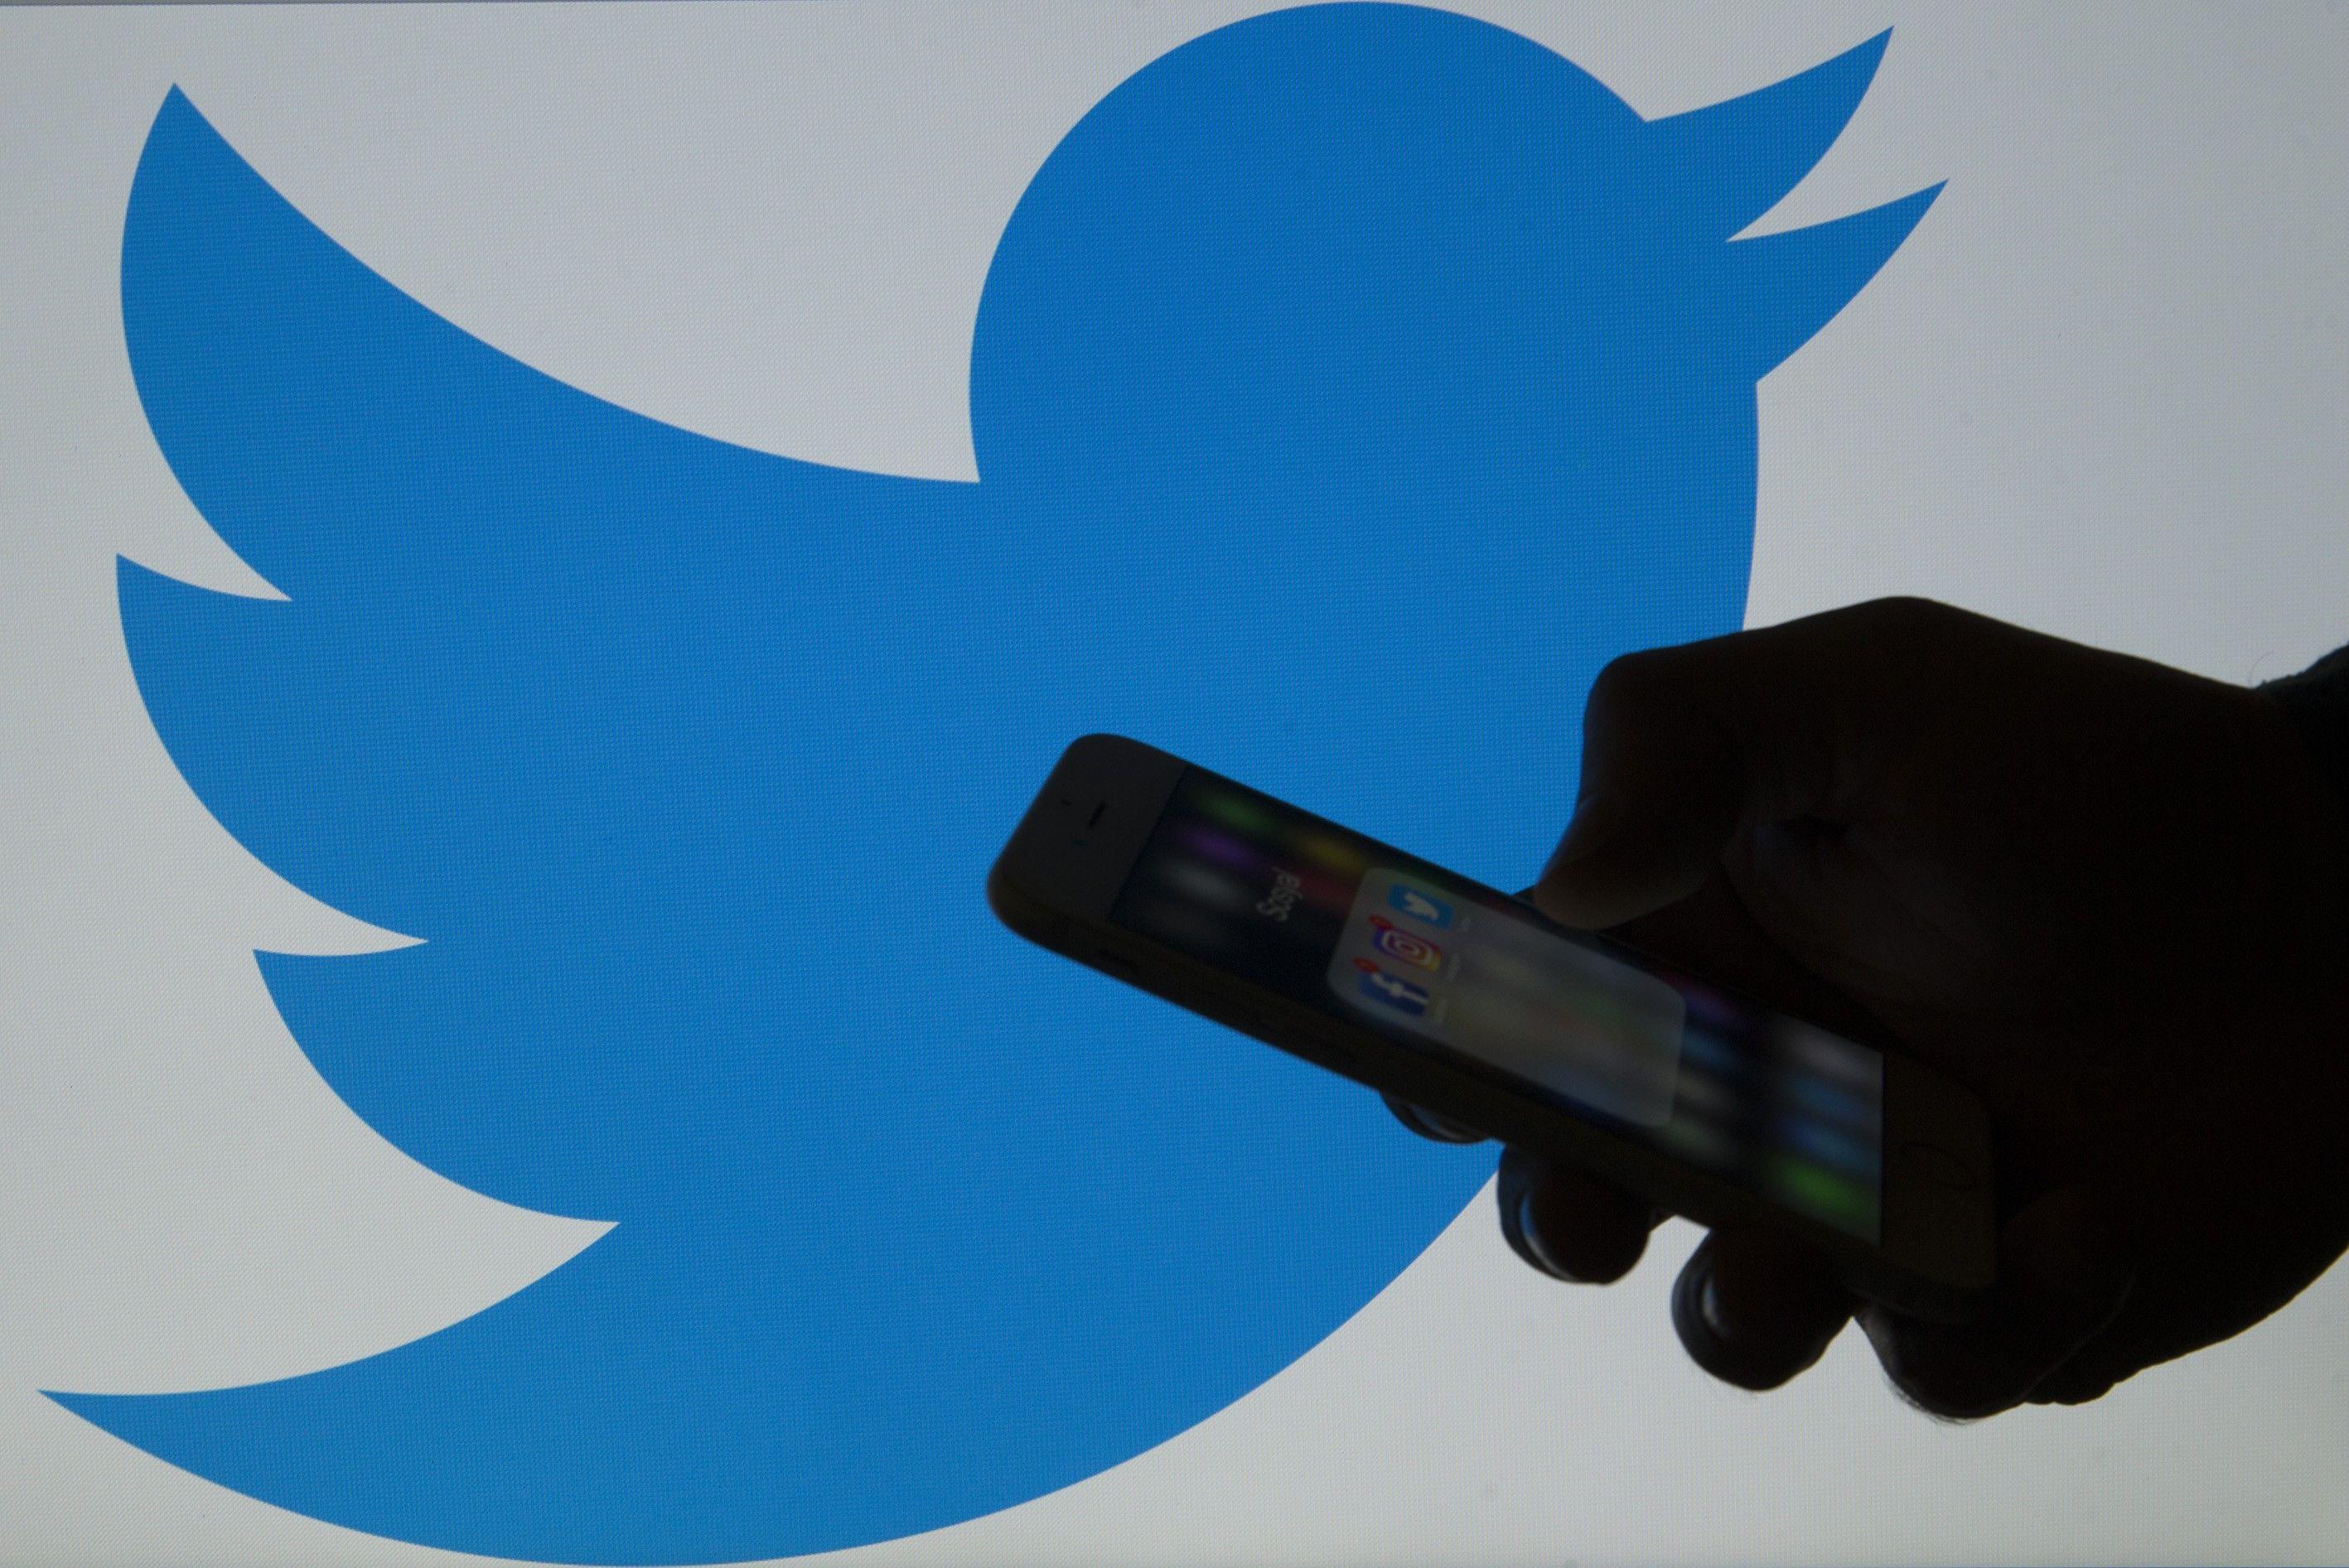 Twitter's Logo - Twitter Finds 200 Accounts Linked to Russian Agents